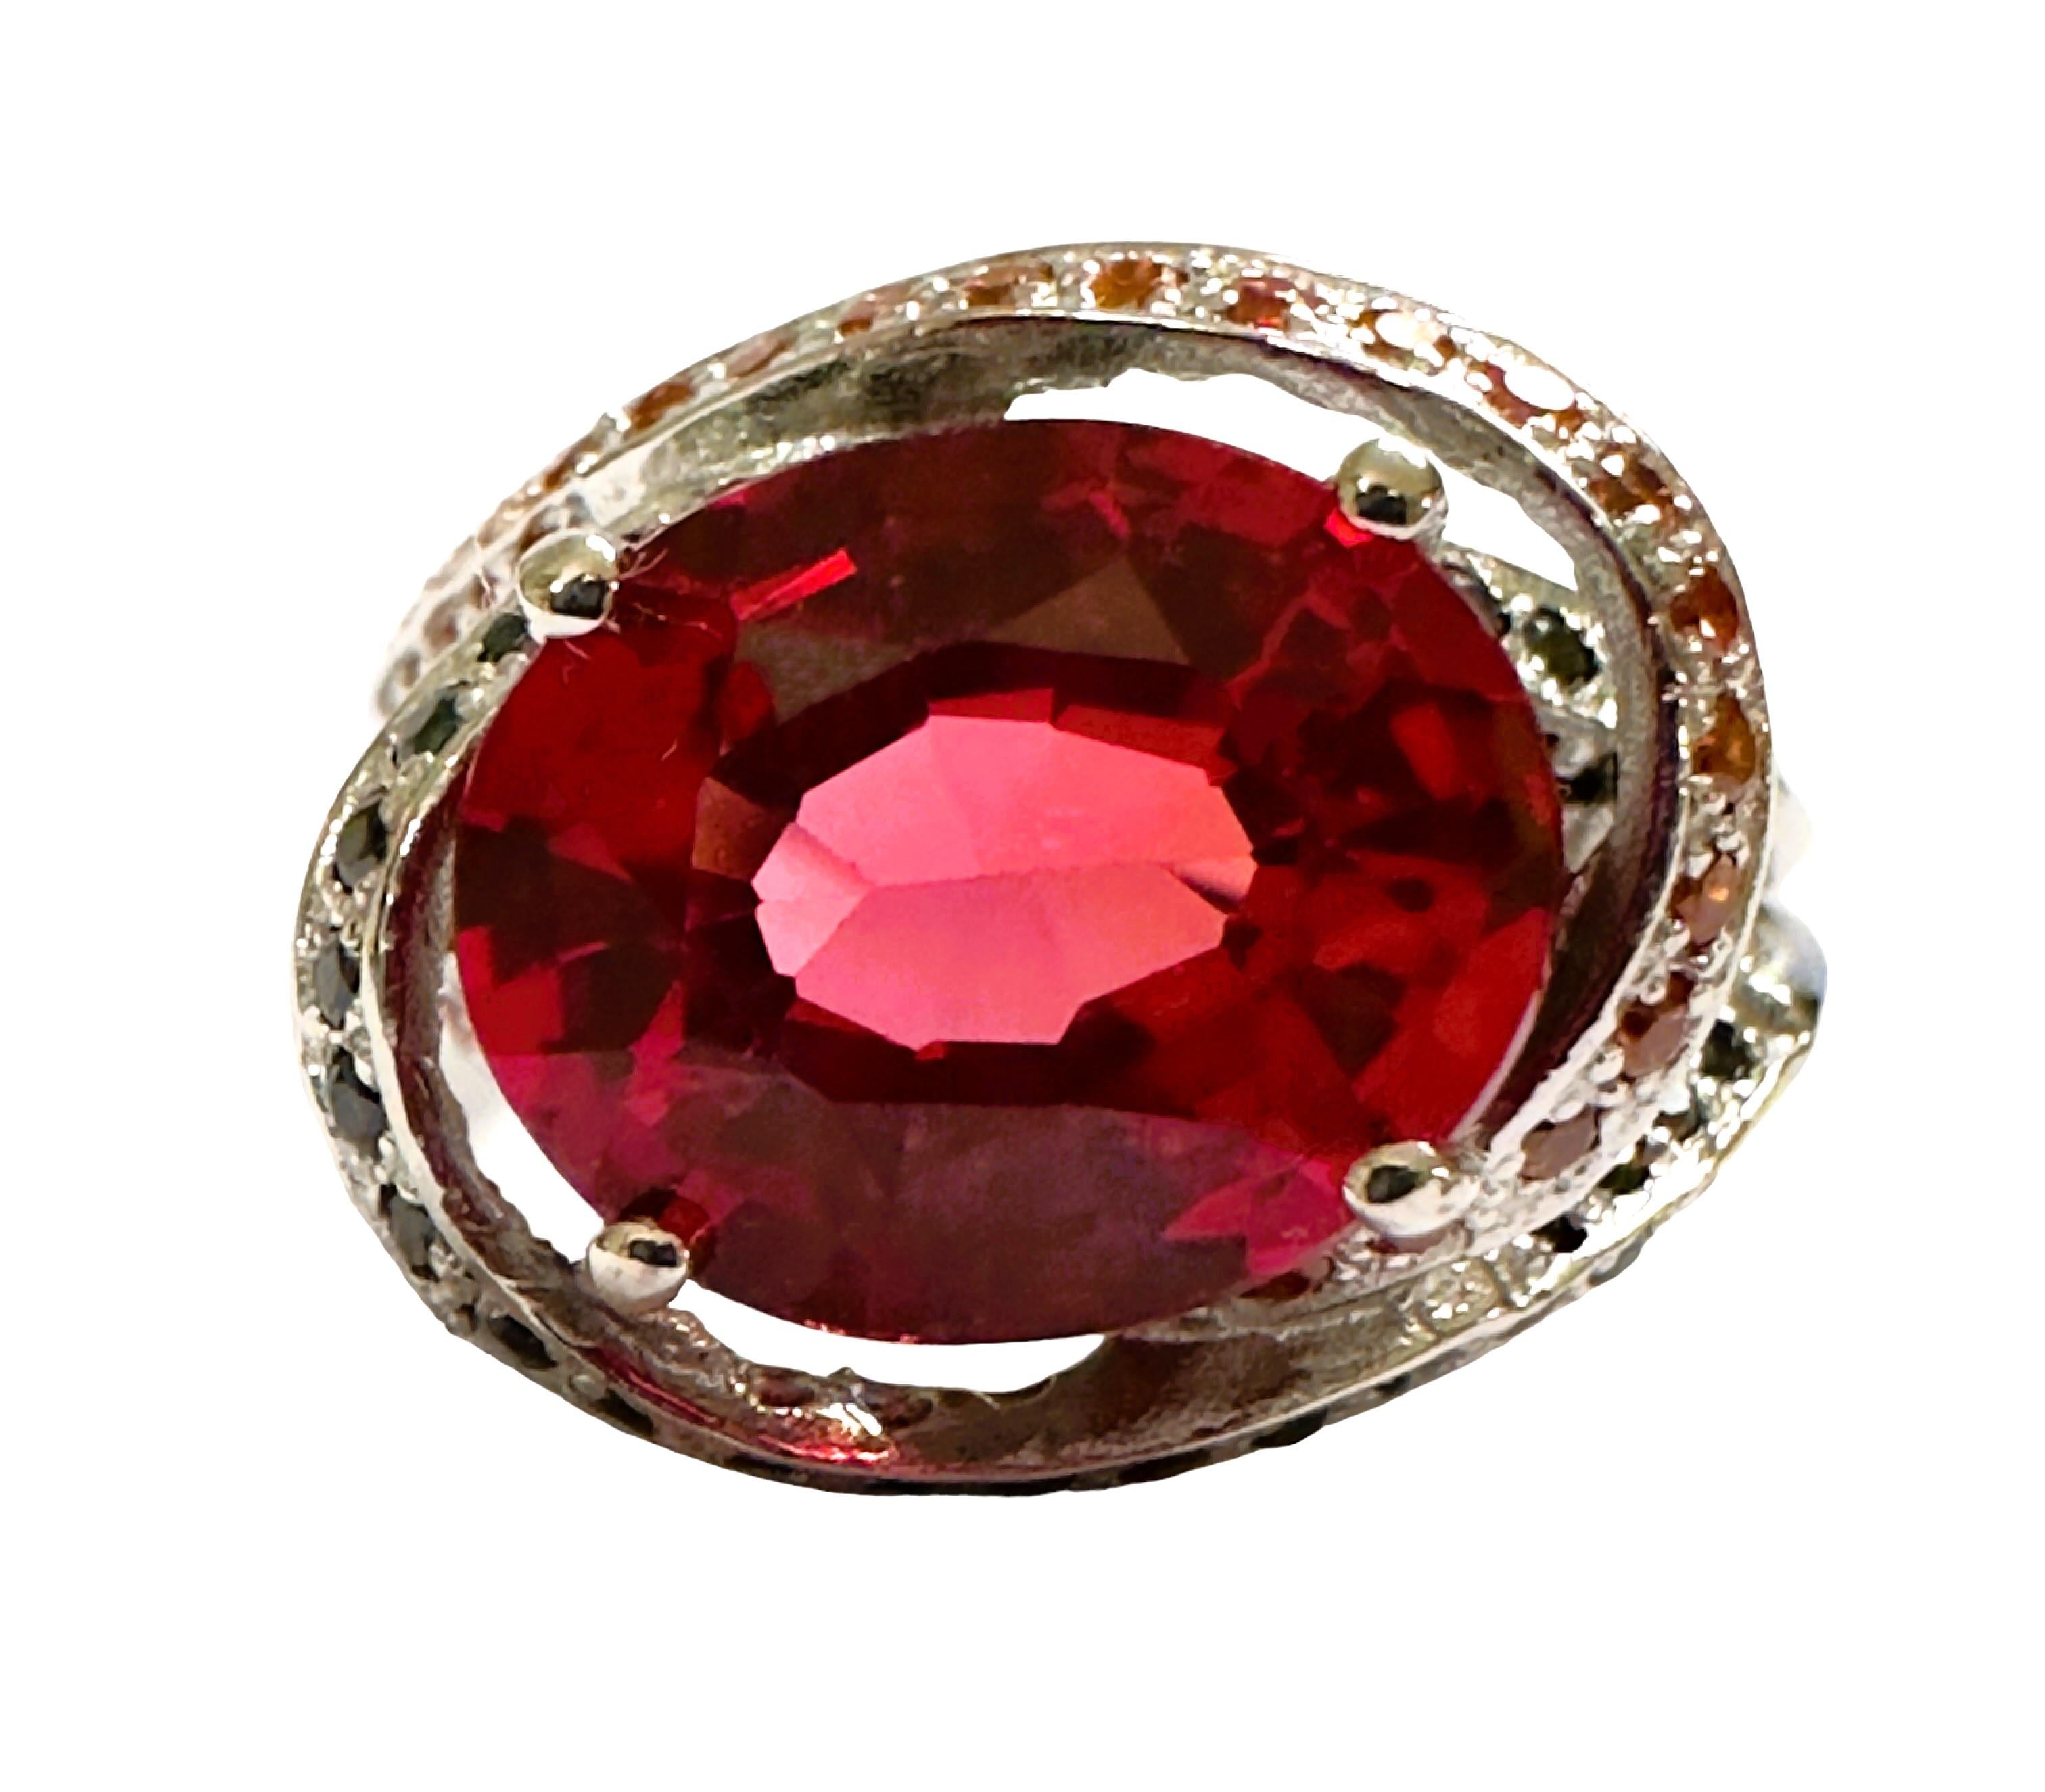 What a beautiful color this stone is!  The ring is a size 5.5.   It is from Africa and is just exquisite.  The 